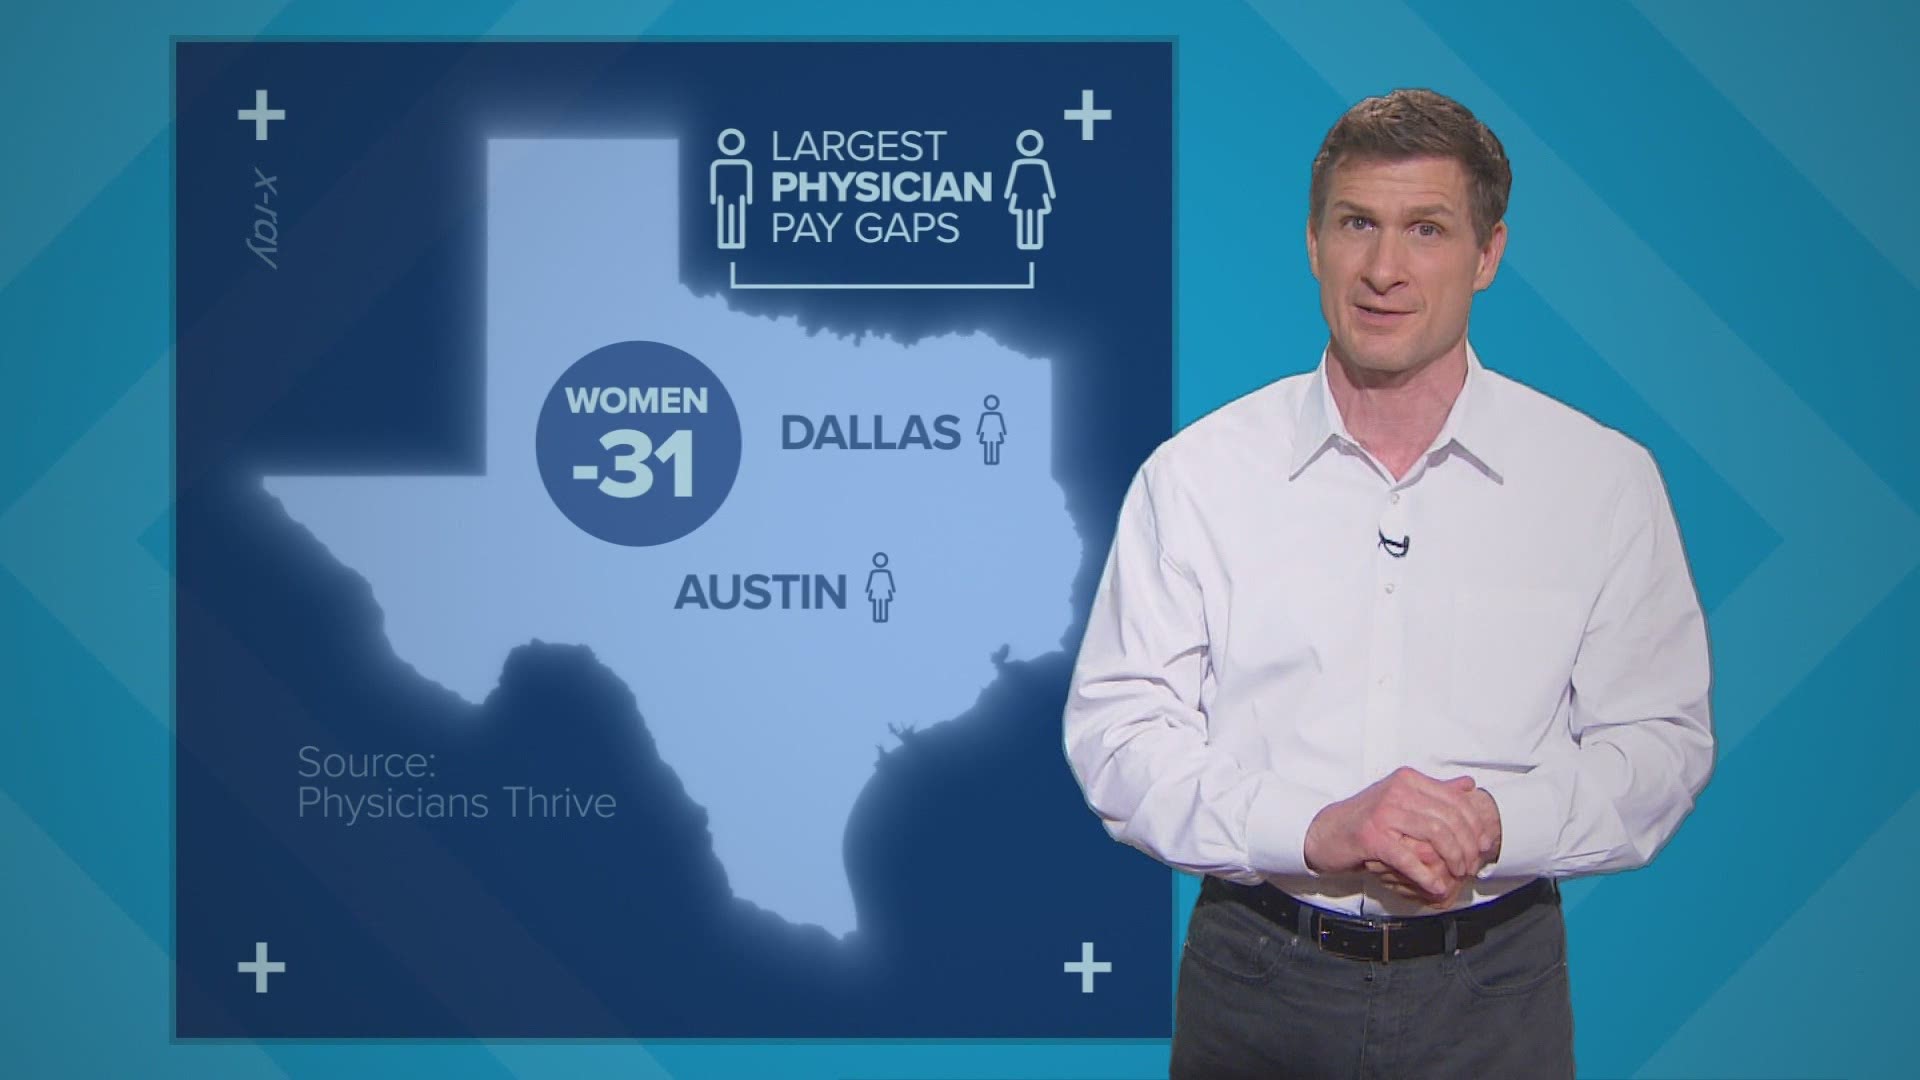 A survey found that women who are doctors in those two Texas cities make an average of 31% less than male doctors.